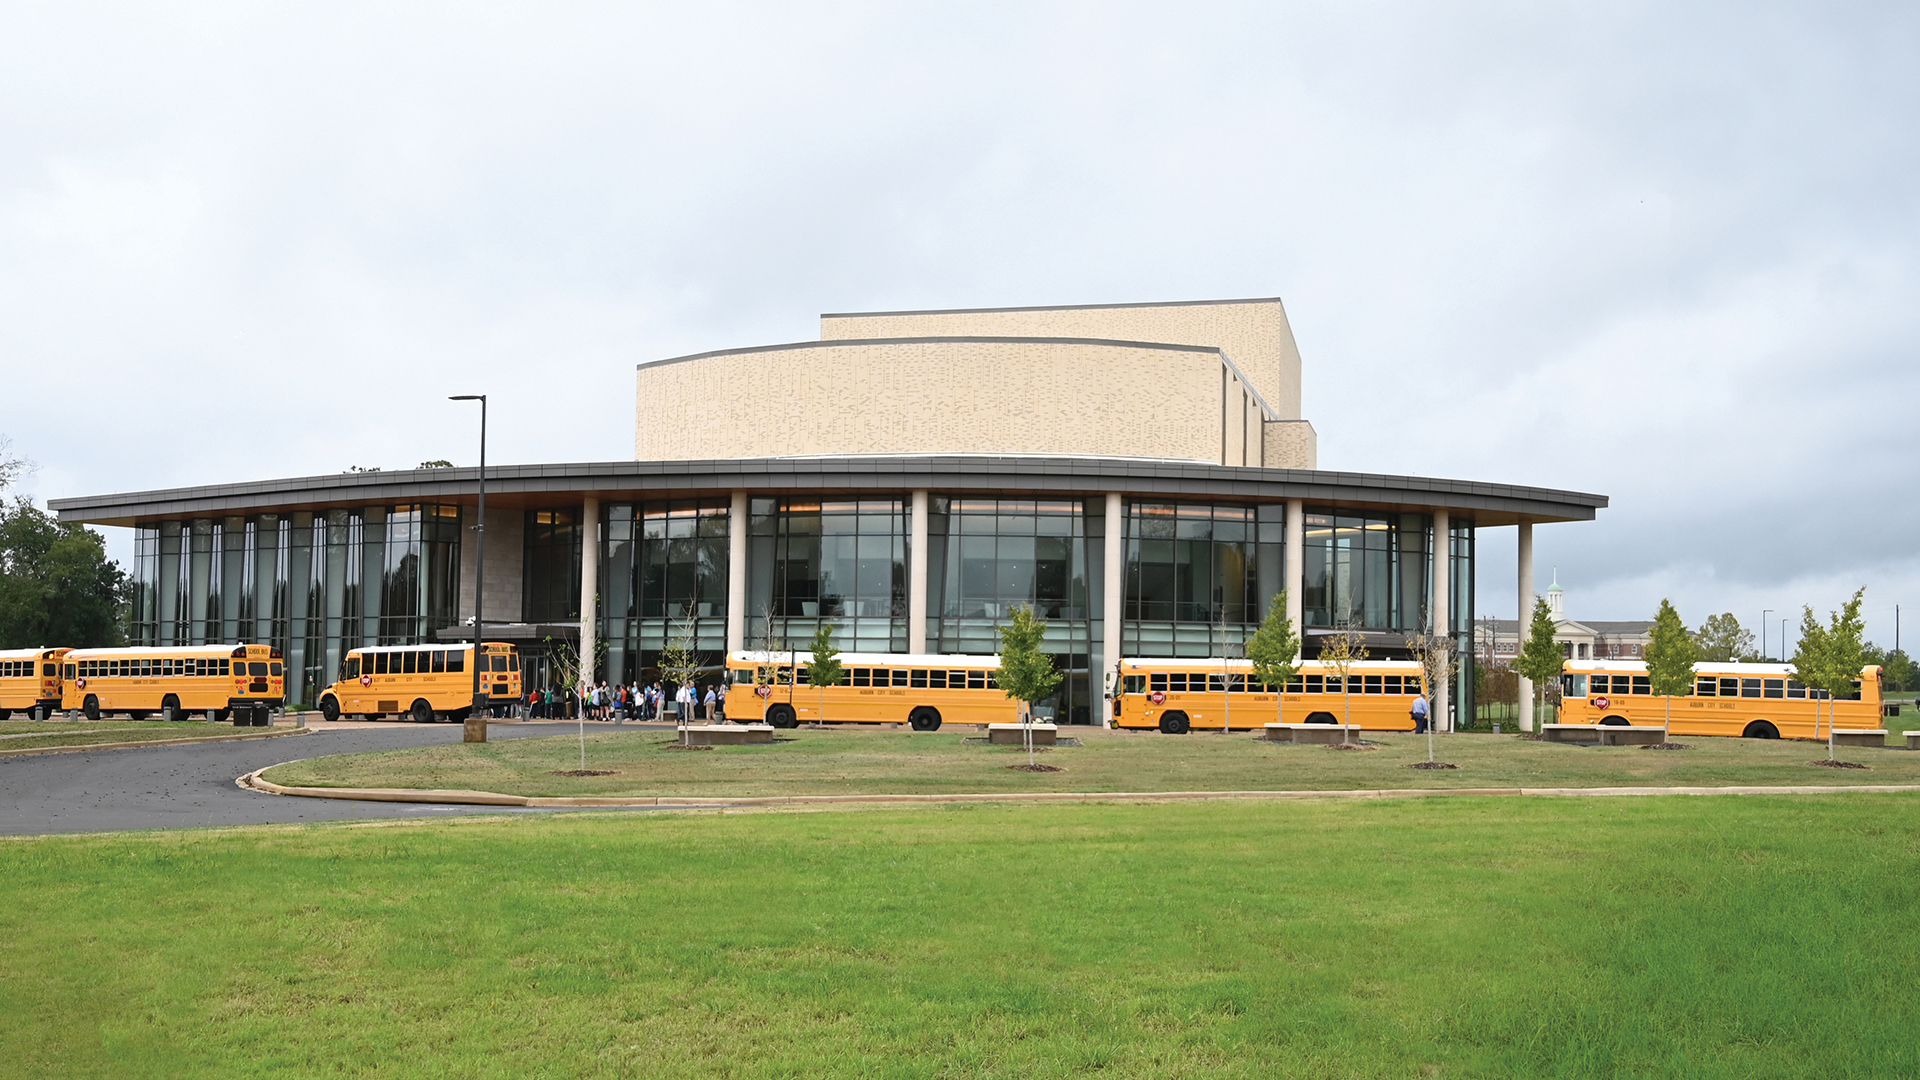 School buses at the Gogue Center